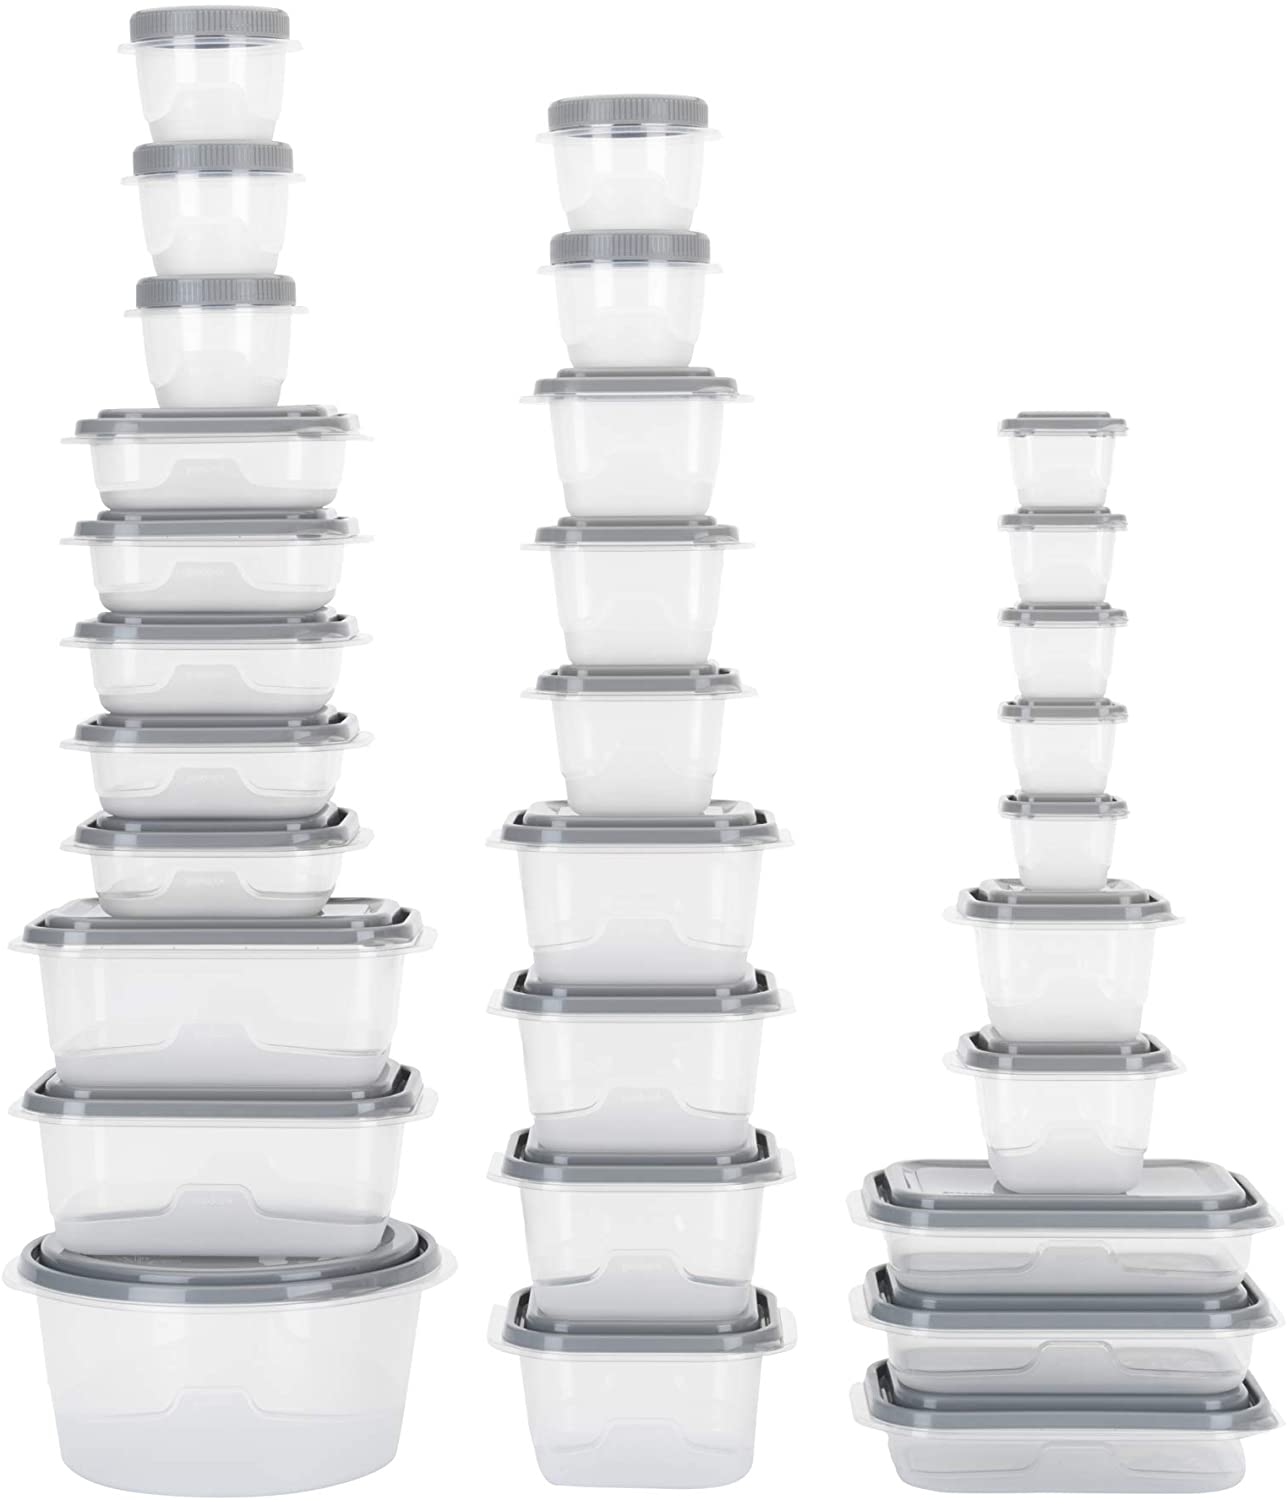 60-Piece GoodCook EveryWare BPA-Free Plastic Food Storage Container Set (Clear/Grey) $14.59 + Shipping is free w/ Prime or on $25+